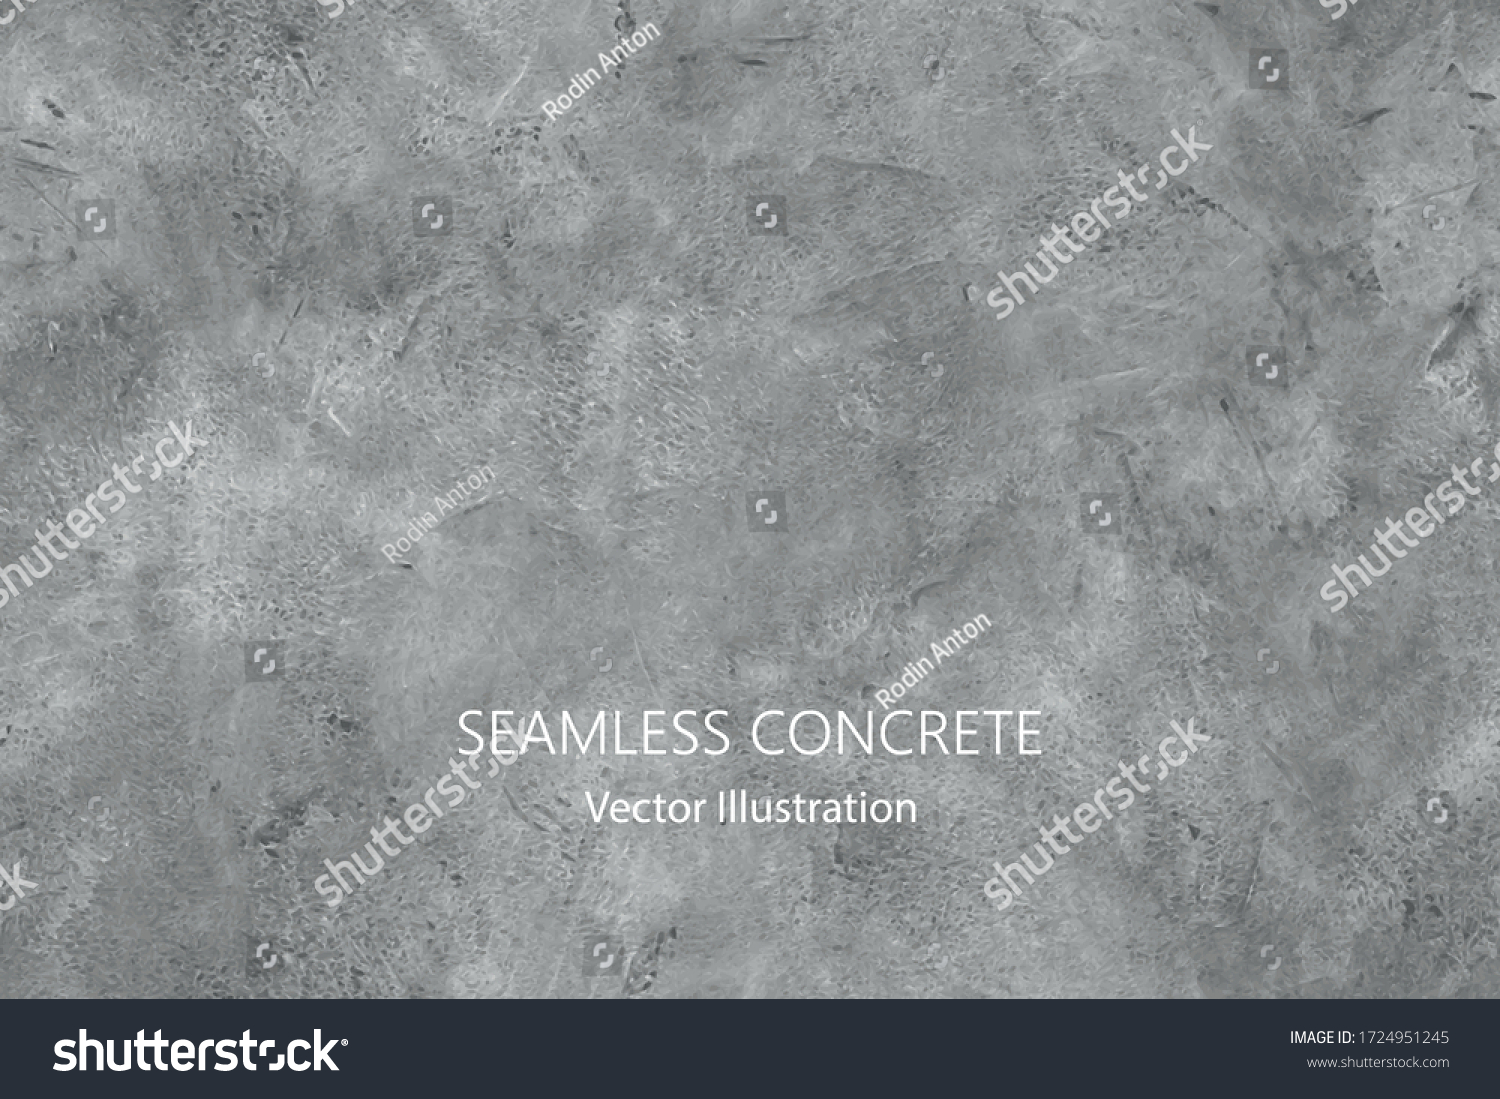 Seamless vector gray concrete texture. Stone wall background. #1724951245